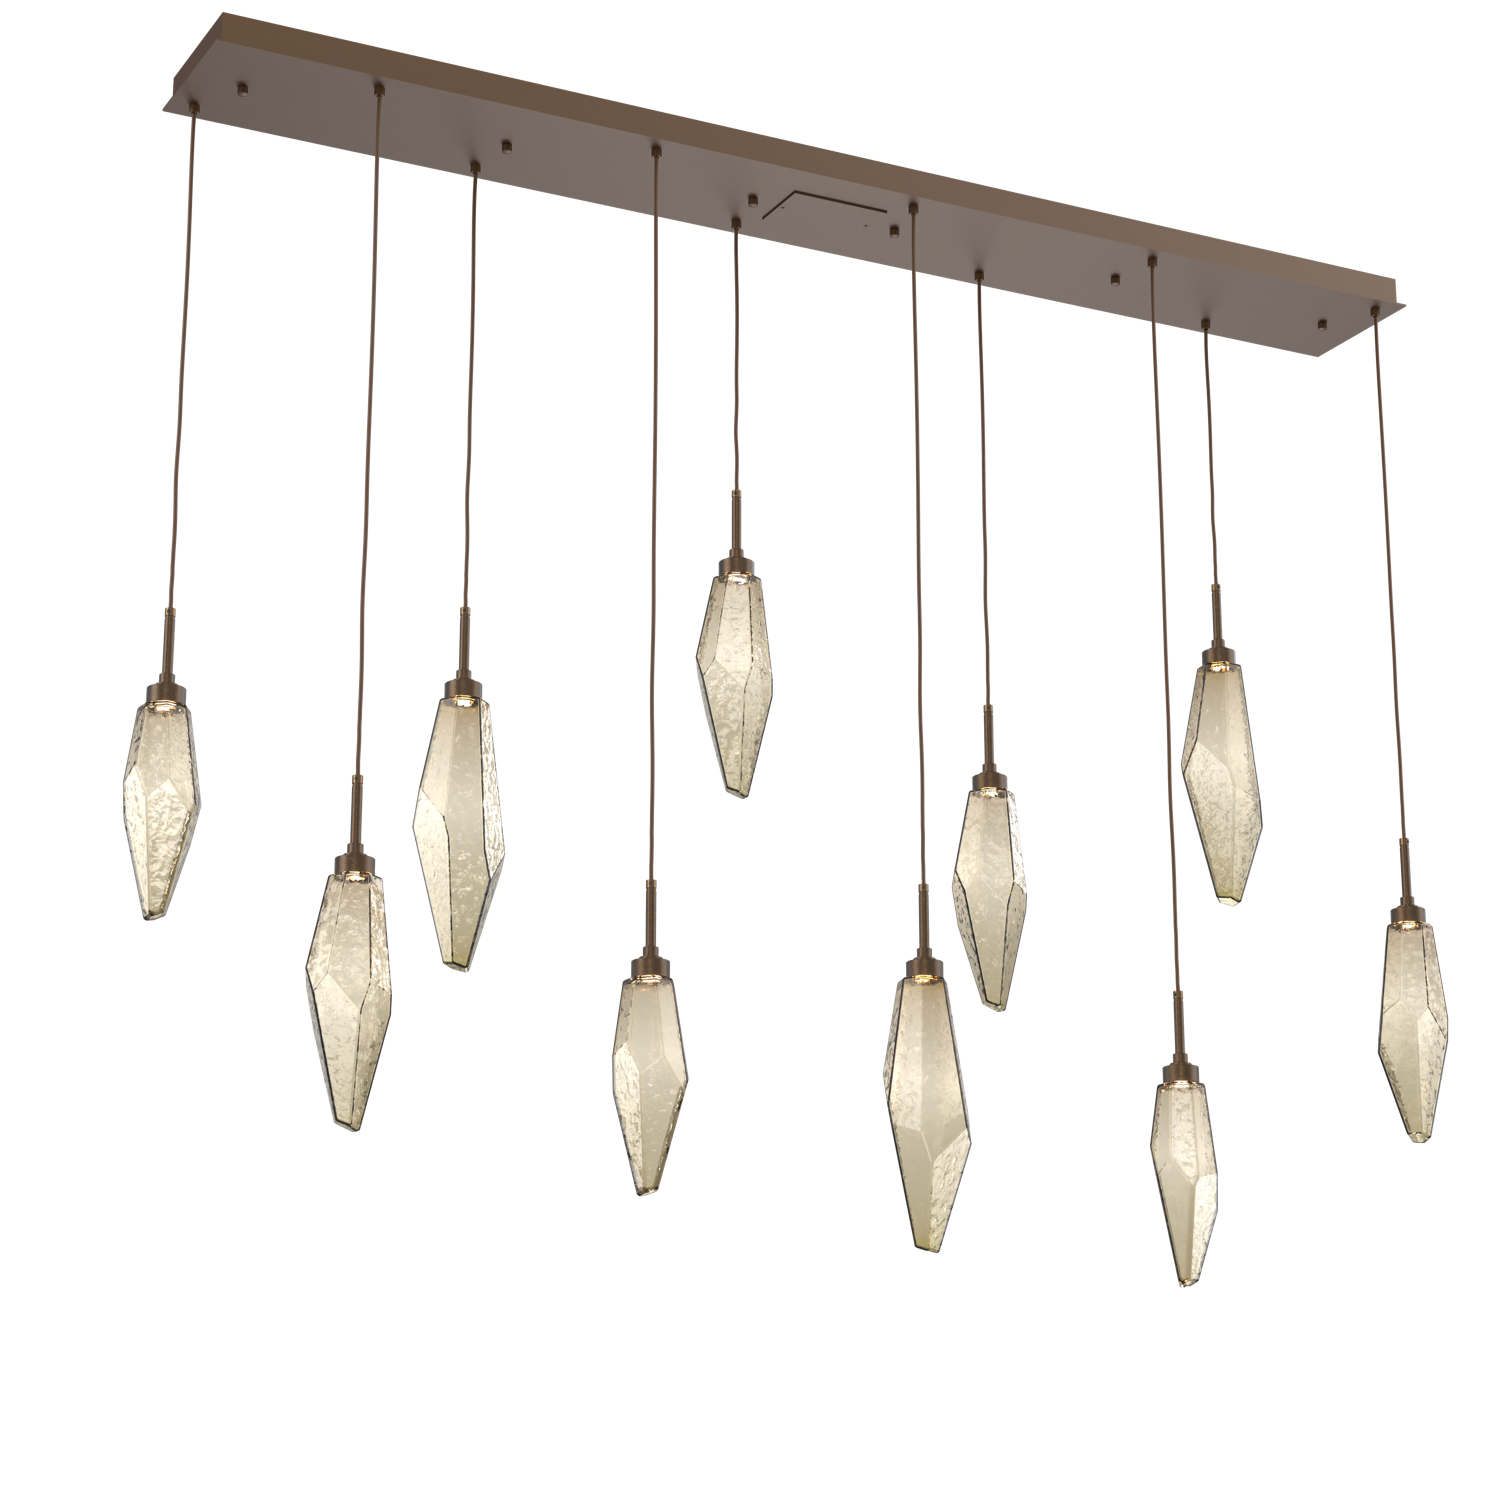 PLB0050-10-FB-CB-Hammerton-Studio-Rock-Crystal-10-light-linear-pendant-chandelier-with-flat-bronze-finish-and-chilled-bronze-blown-glass-shades-and-LED-lamping